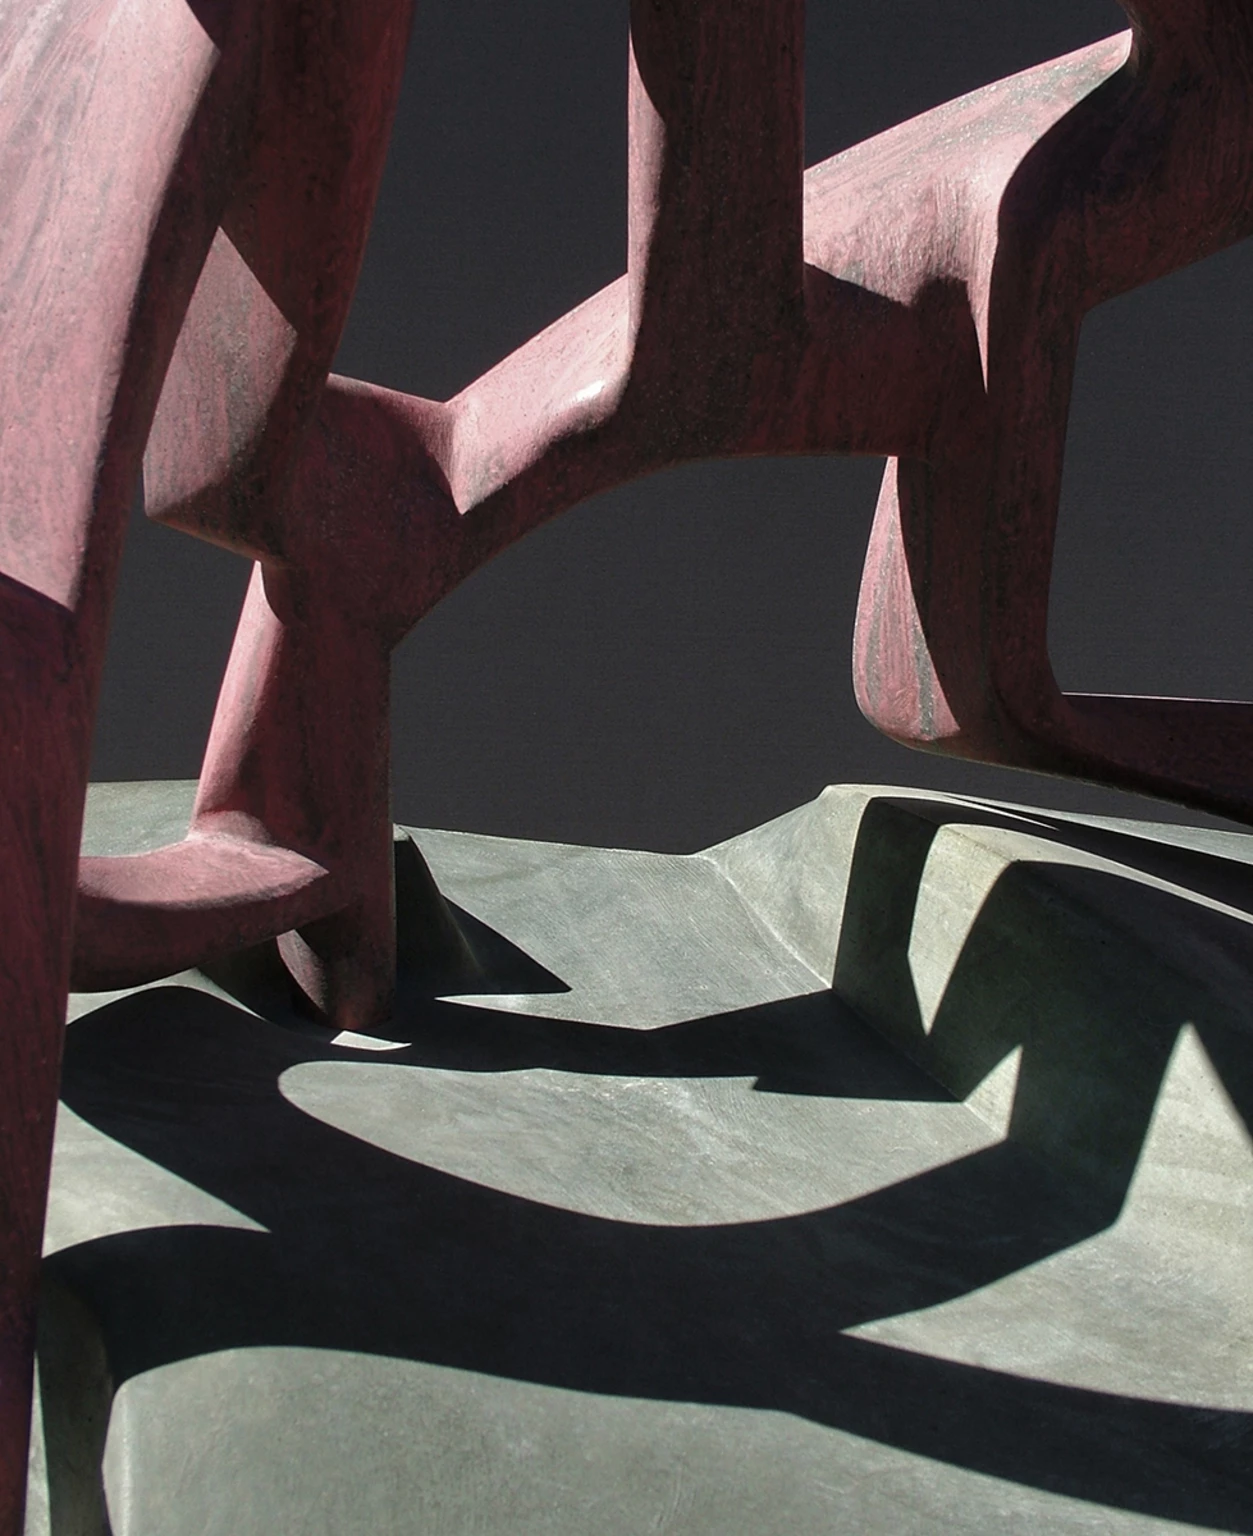 Gate, 2010 - colored and painted concrete, 50 x 60 x 94 cm